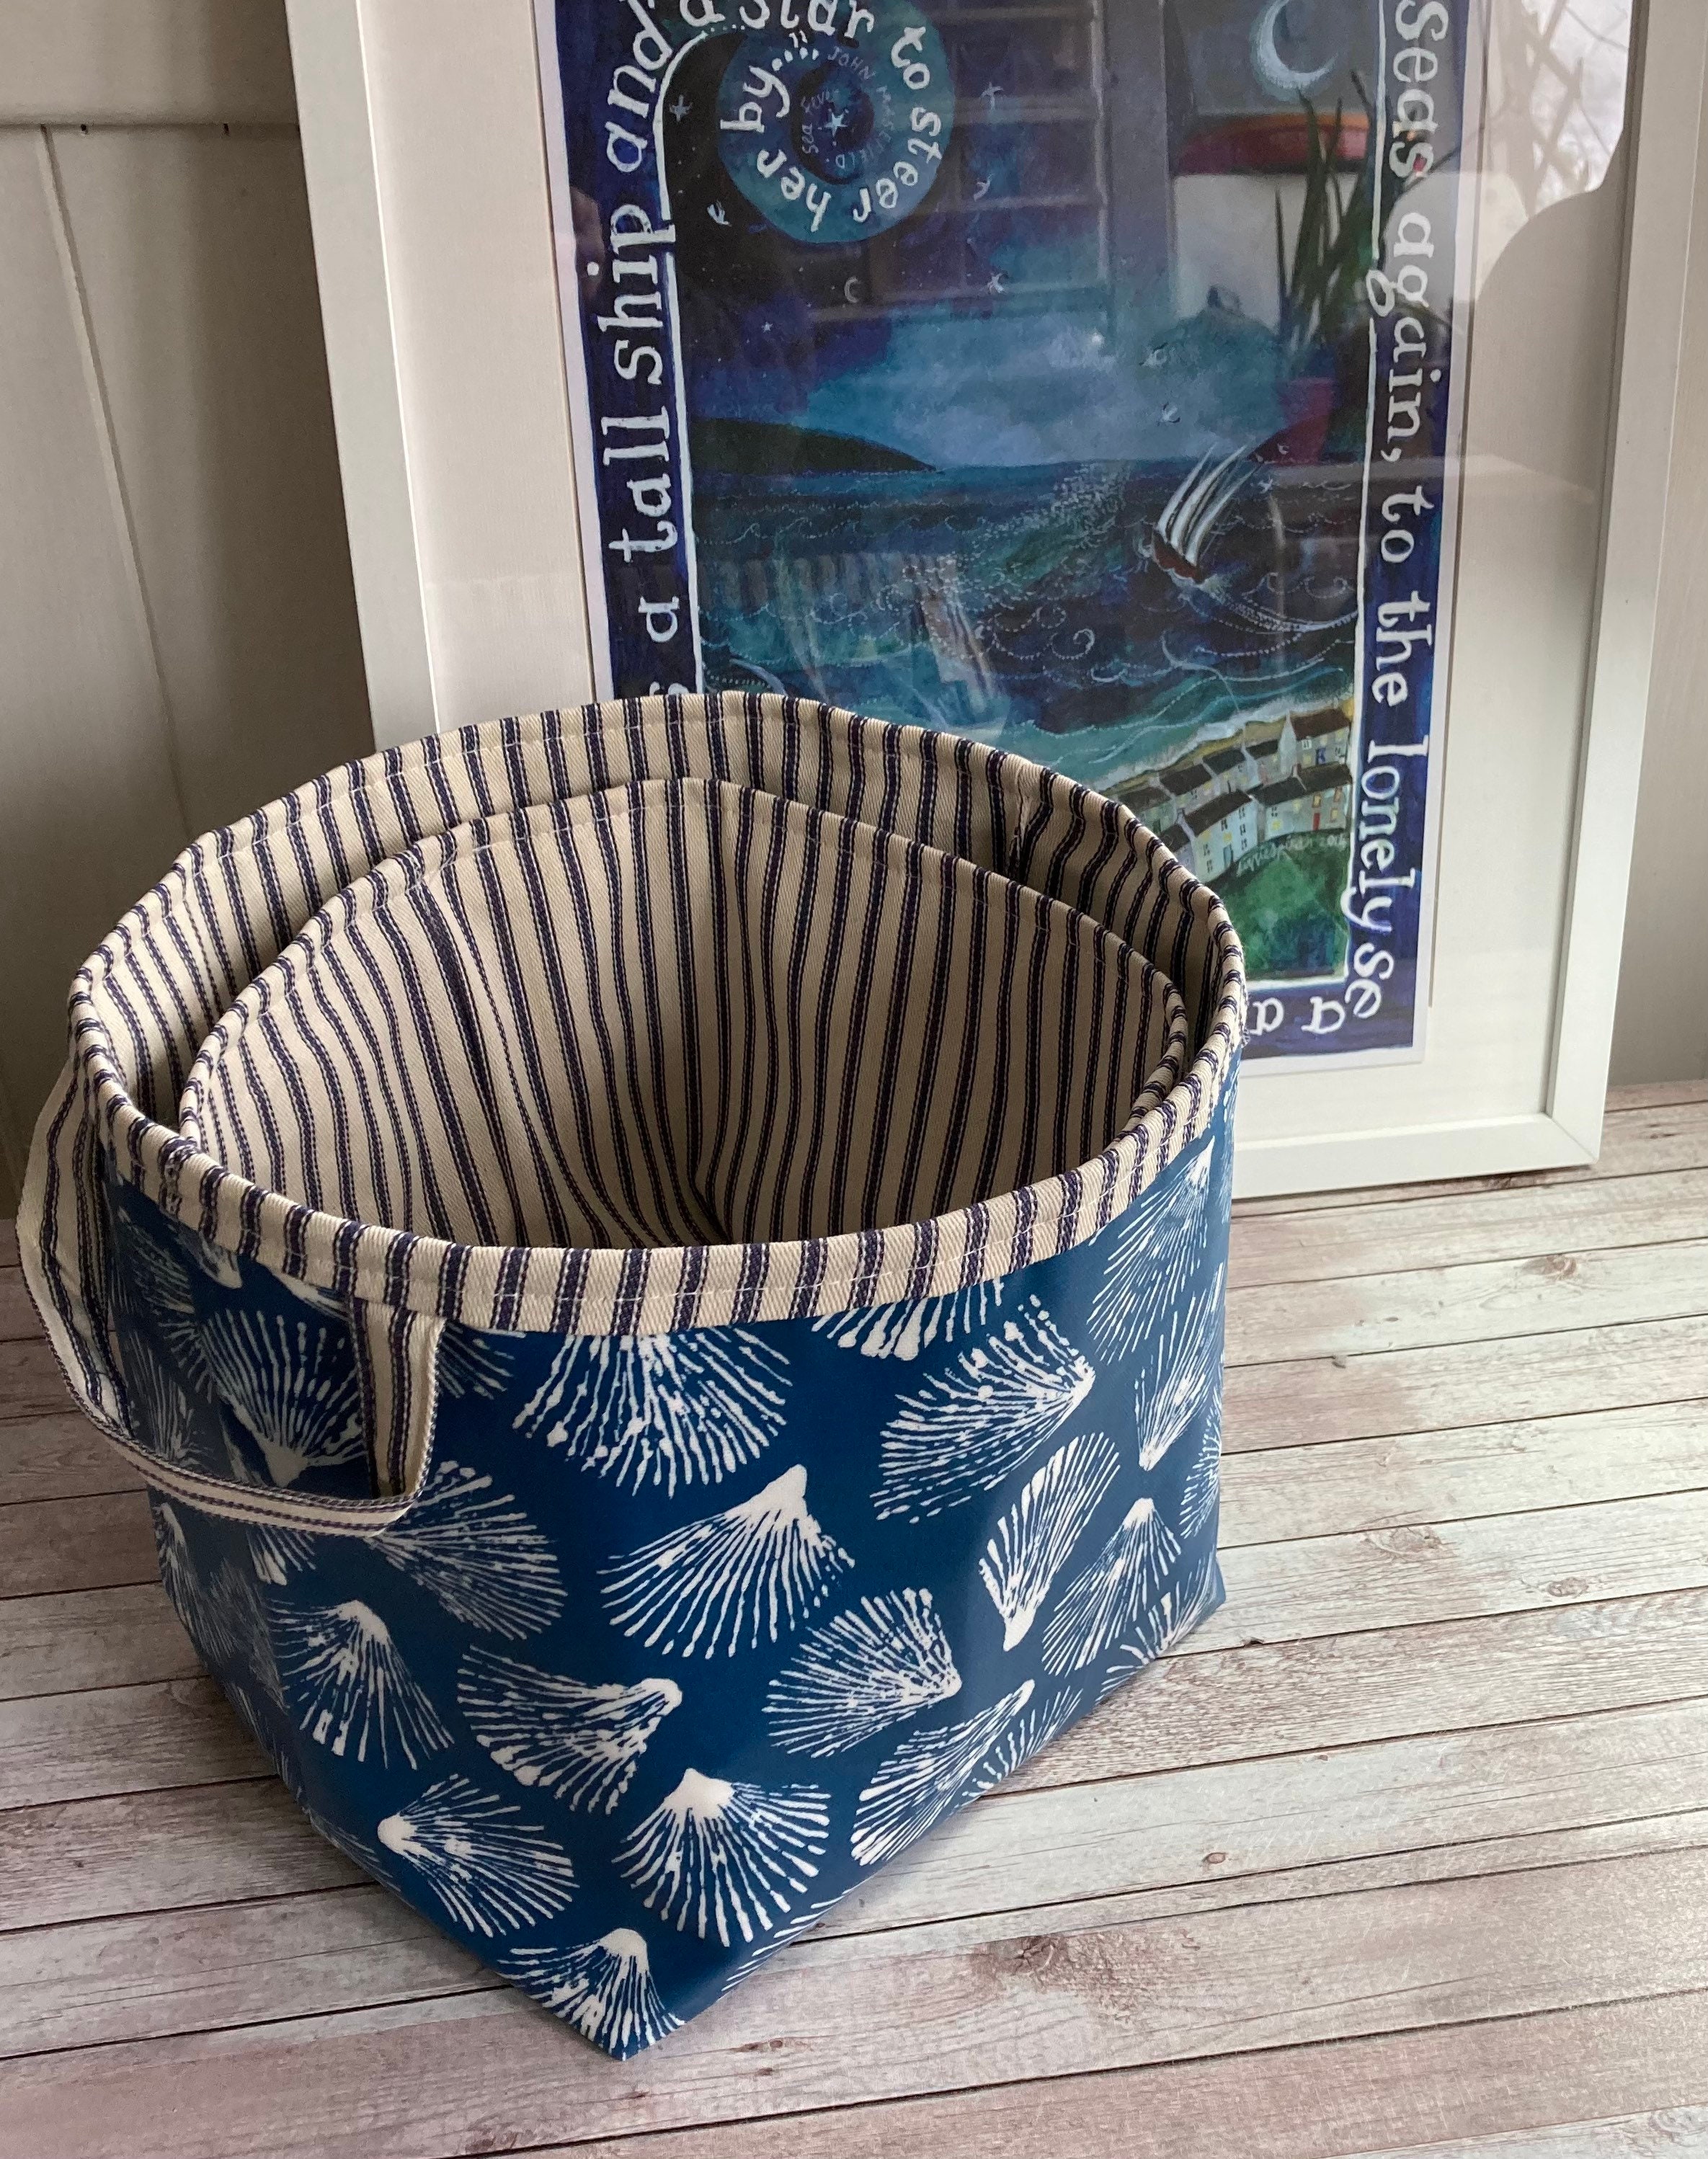 Storage Basket Fabric Oilcloth Shell Print Ex-large